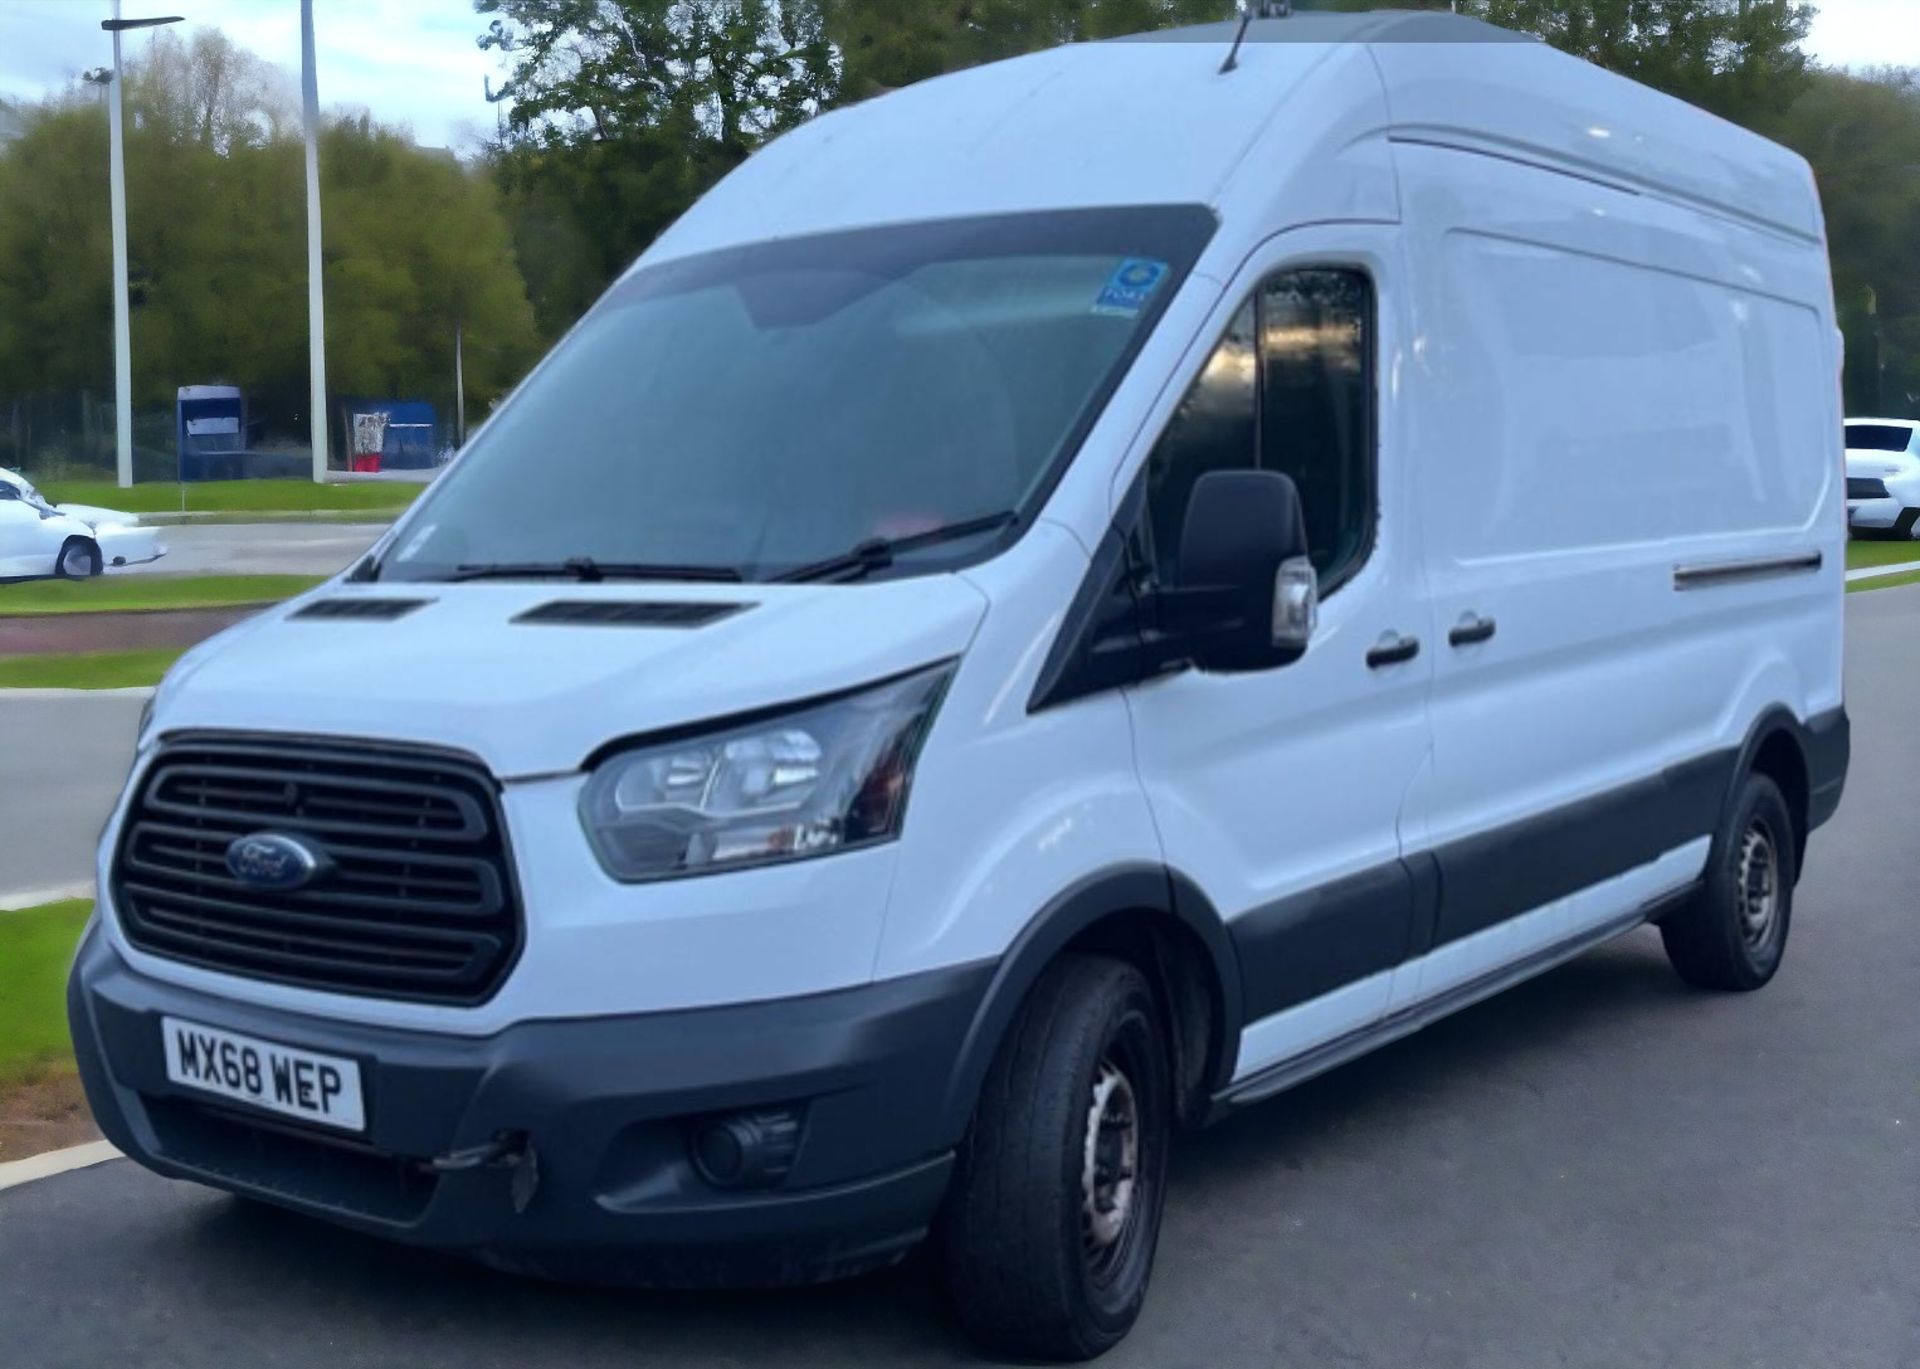 2018-68 REG FORD TRANSIT T350 RWD L3H2 -HPI CLEAR - READY FOR WORK! - Image 2 of 10